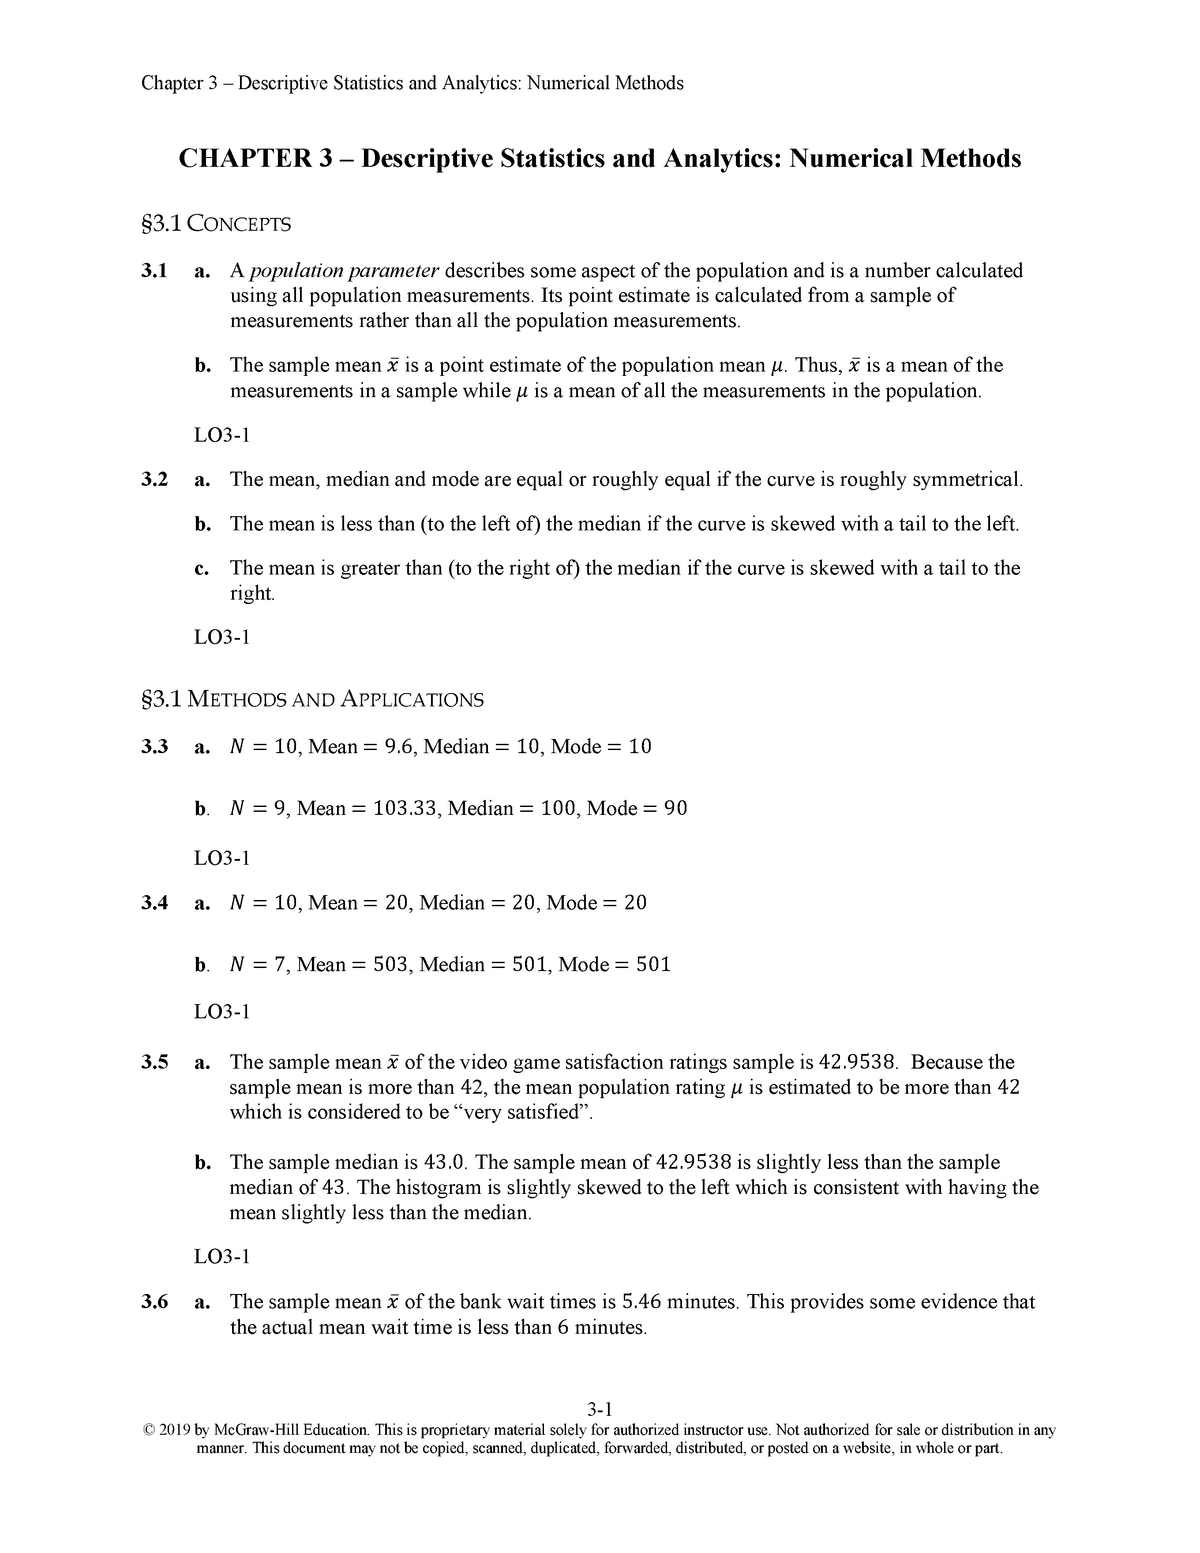 mcgraw hill chapter 3 homework answers